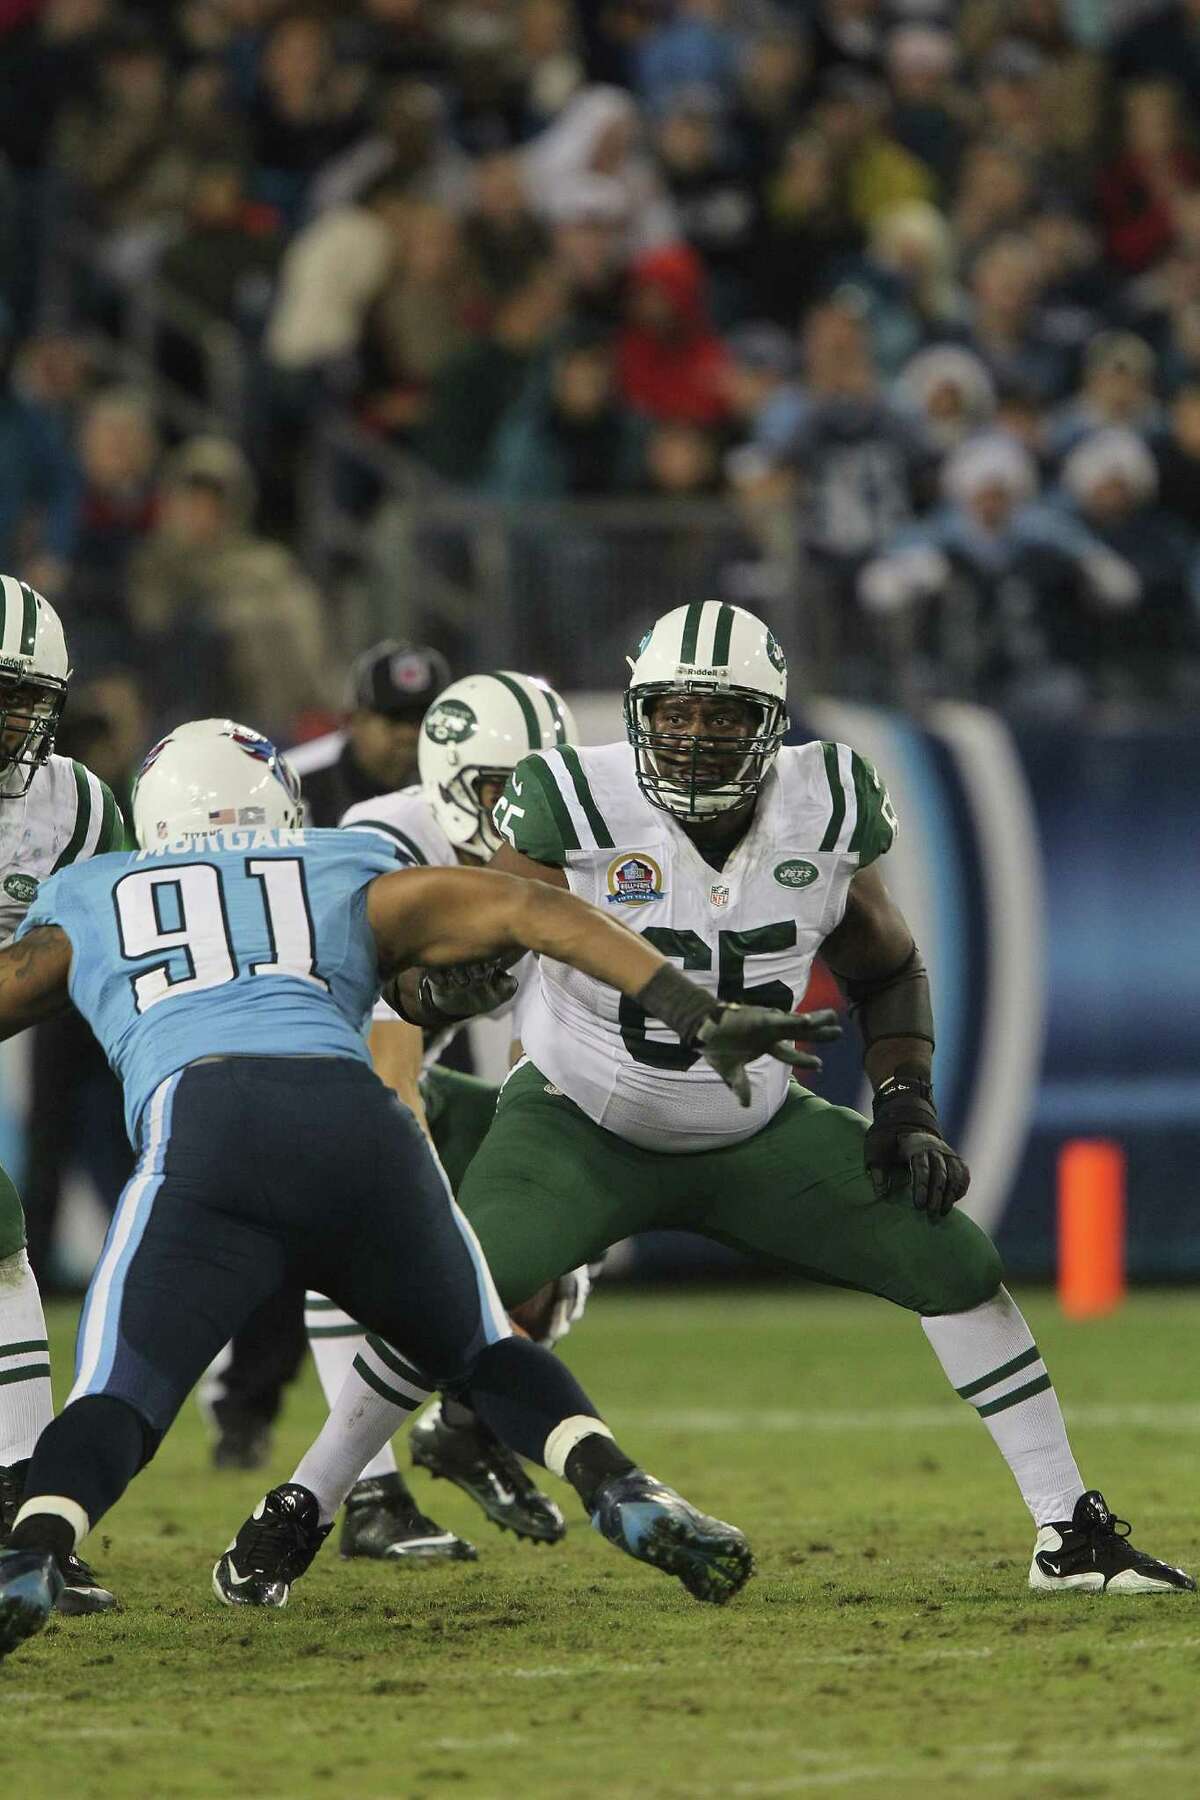 Former Jets guard Brandon Moore decided to retire instead of joining the Cowboys, who have an offensive line depleted by injuries. New York declined to re-sign him in the offseason.